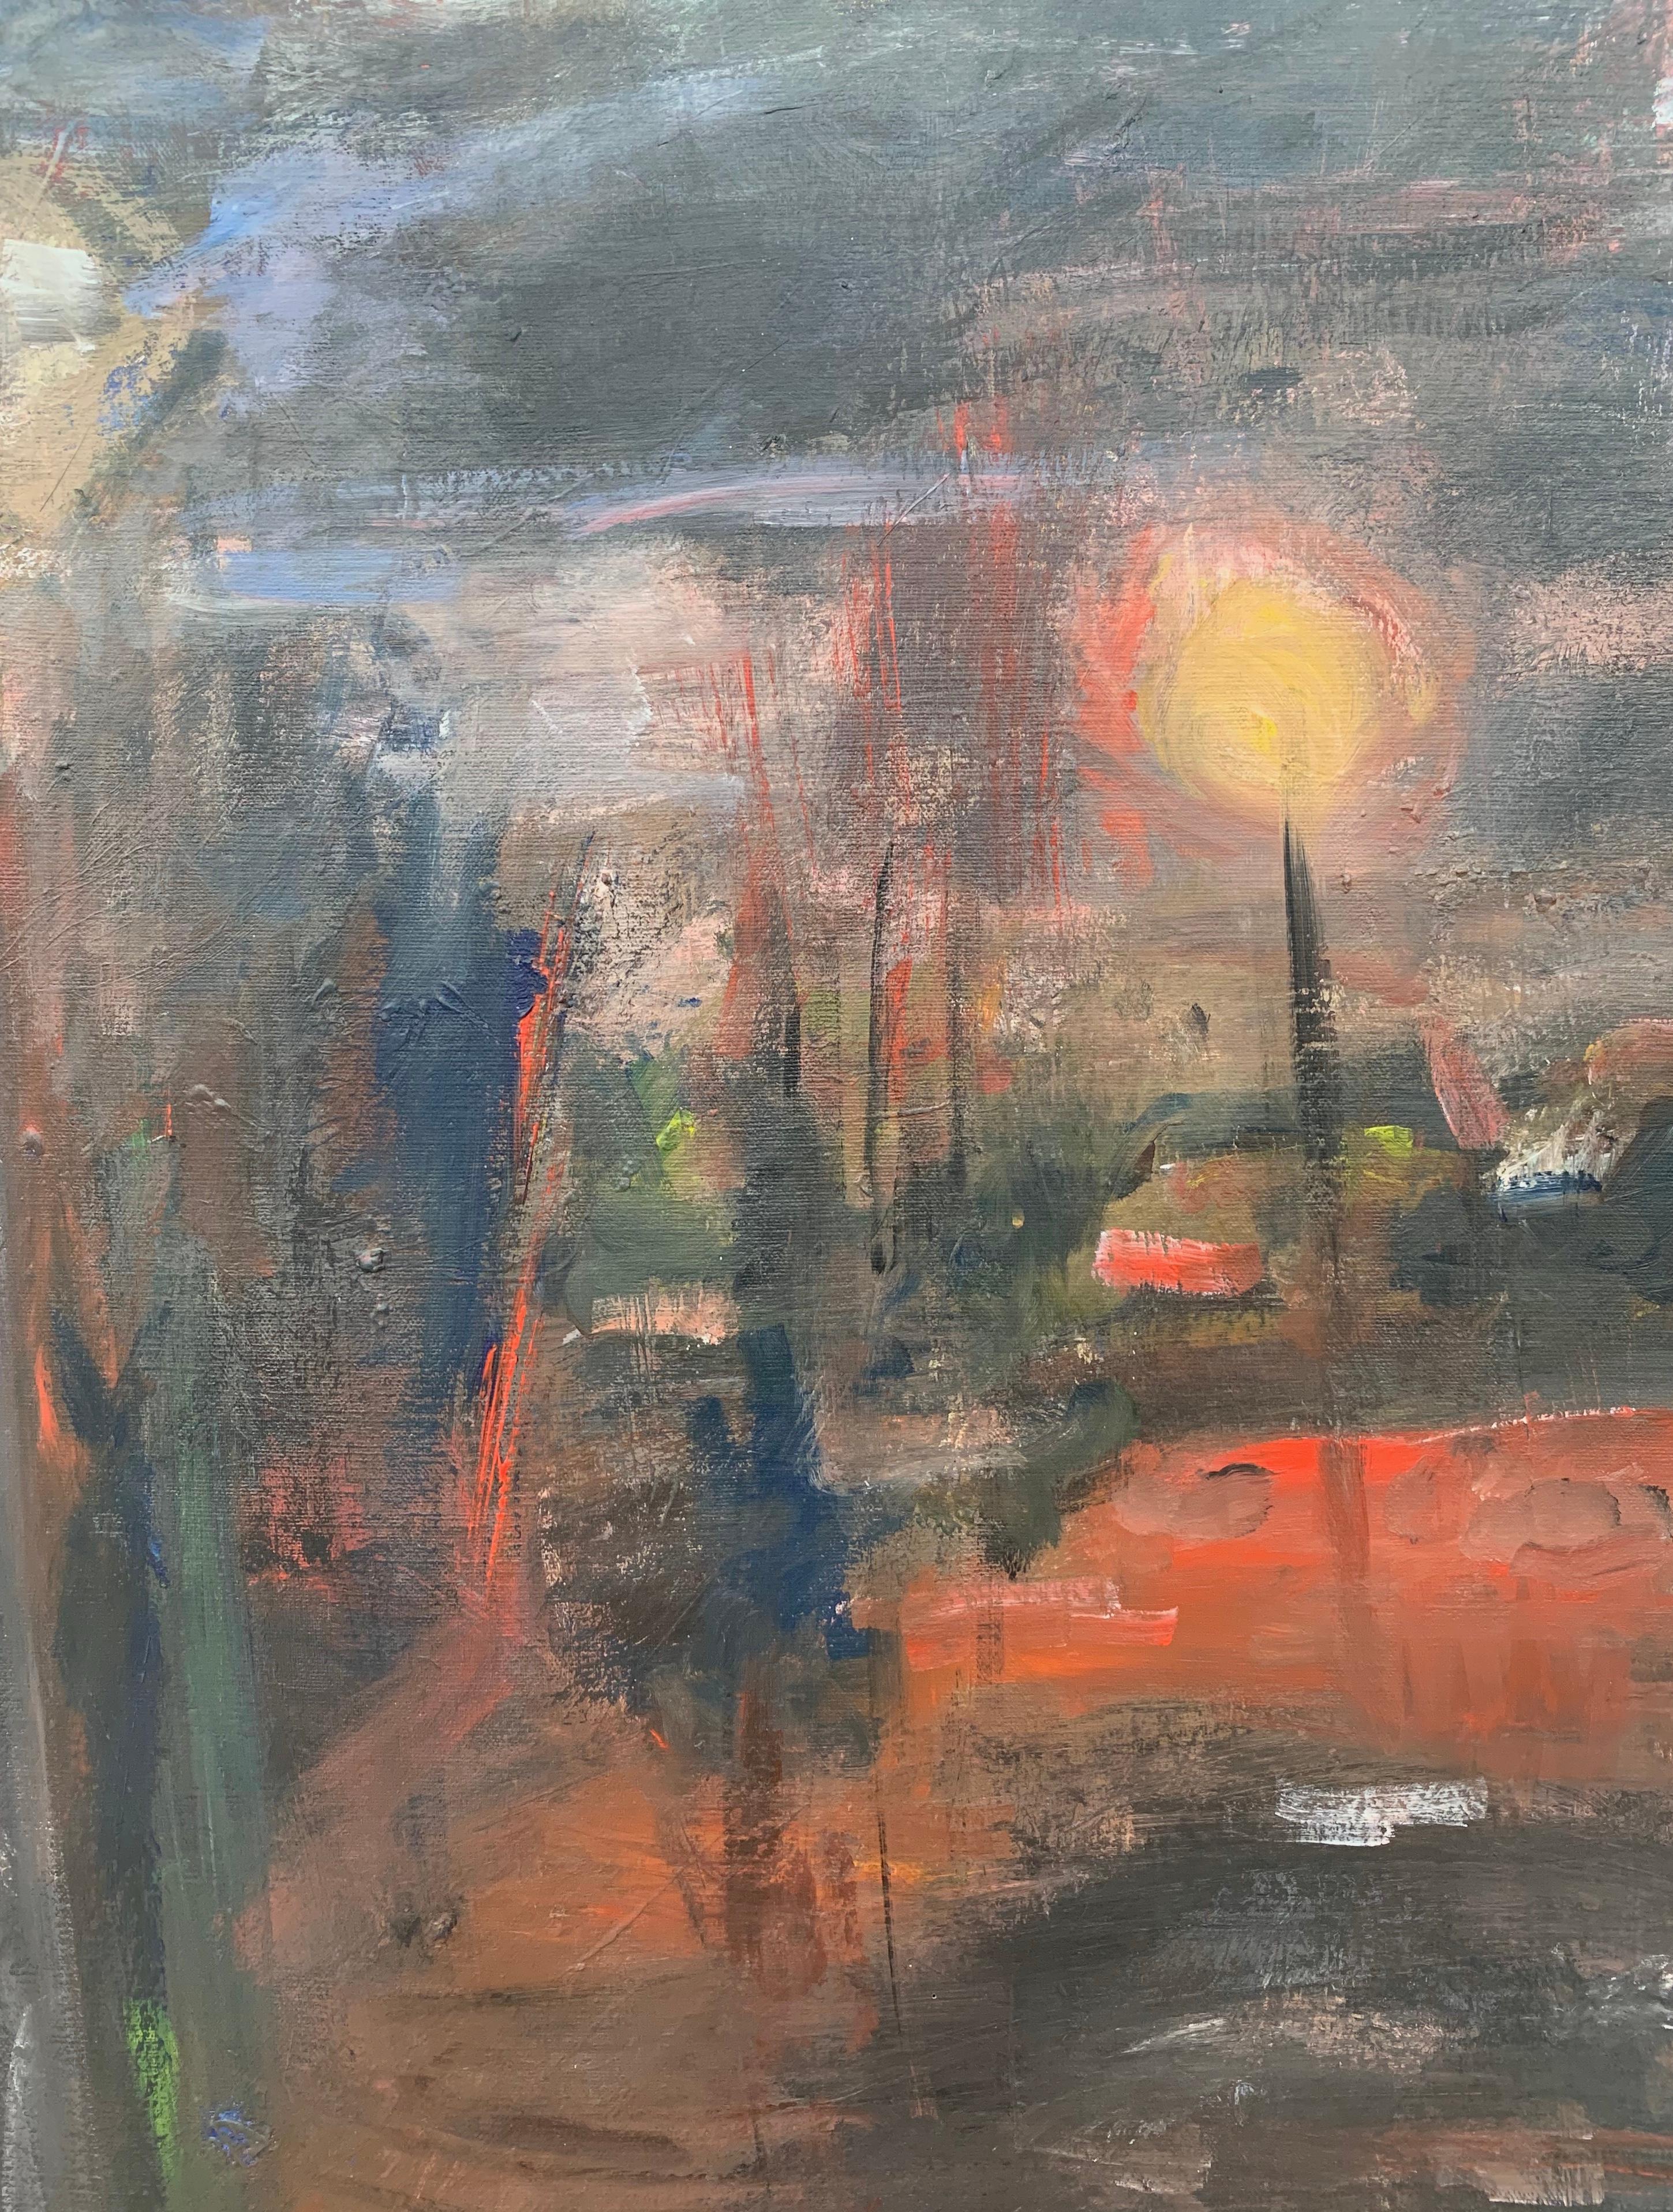 Dark & Atmospheric Abstract Expressionist Art by Contemporary British Painter For Sale 2